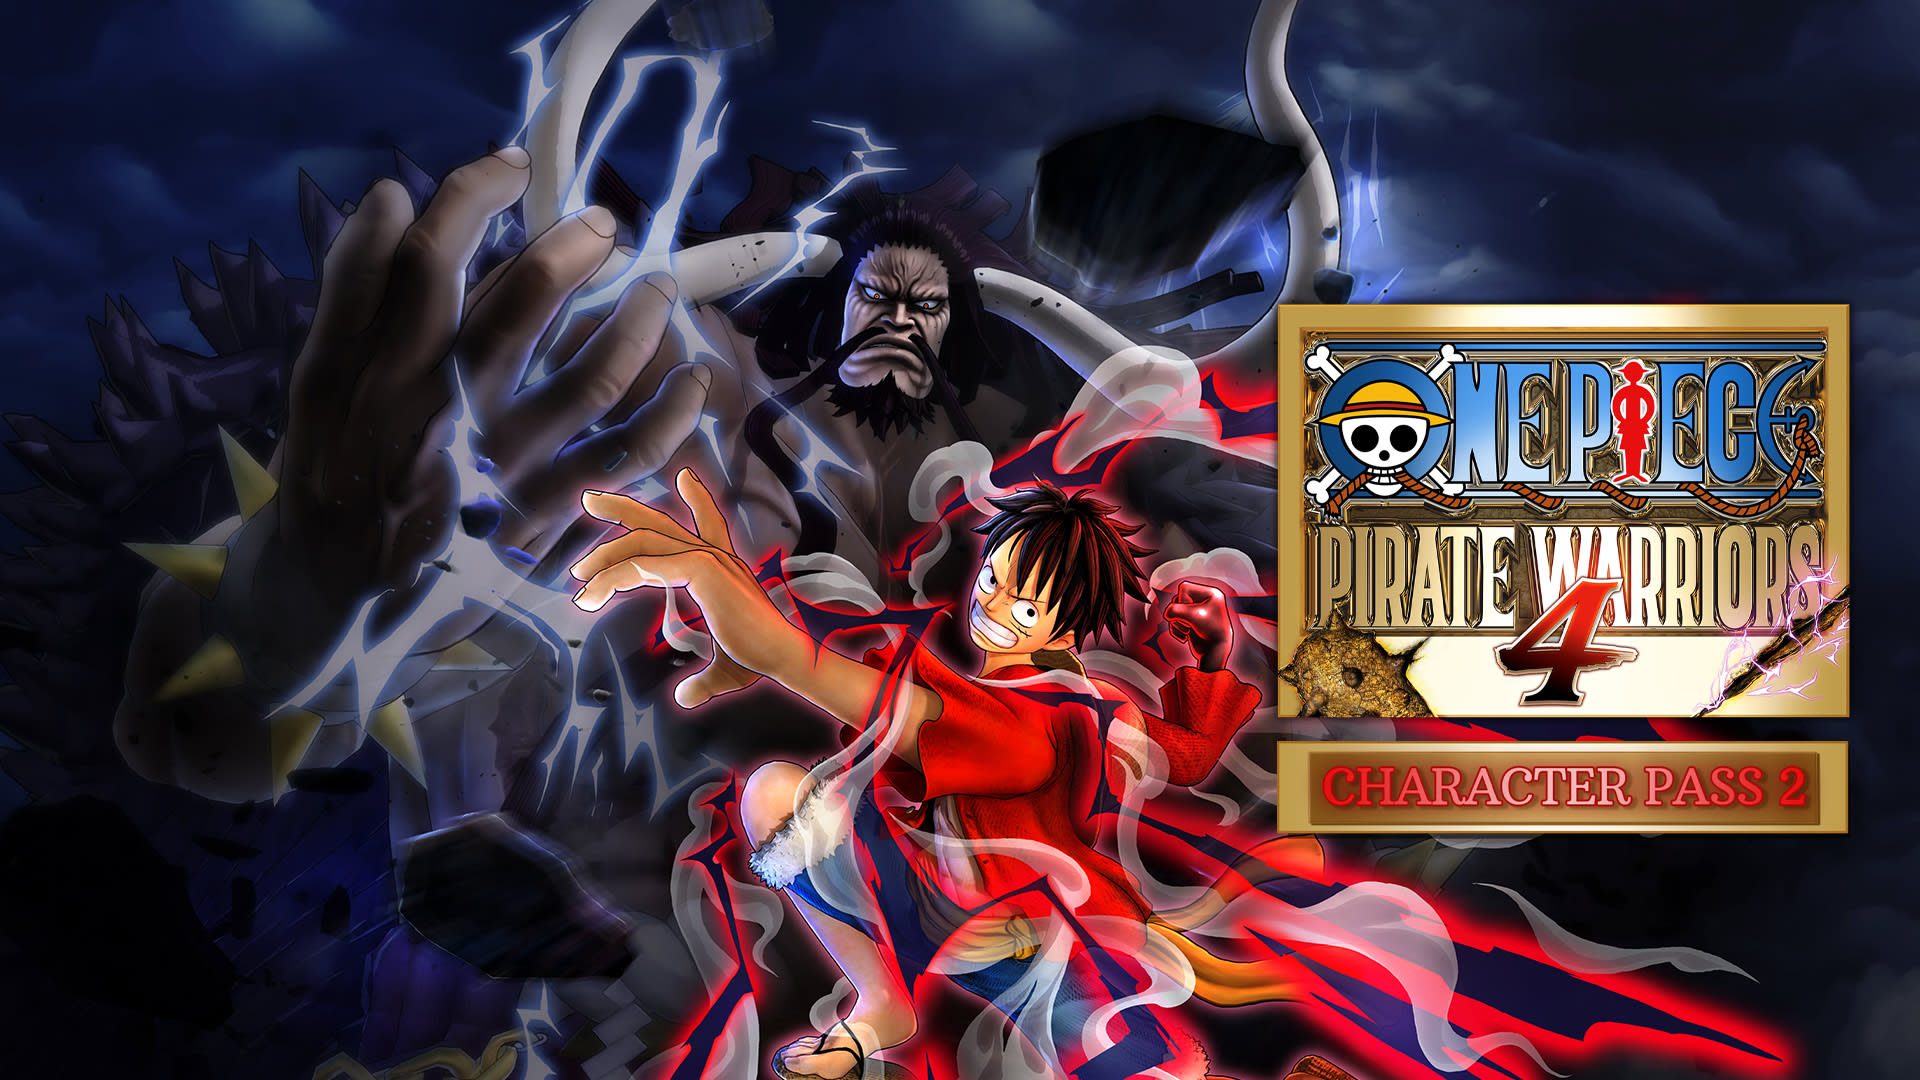 Character Pass 2 ONE PIECE: PIRATE WARRIORS 4 